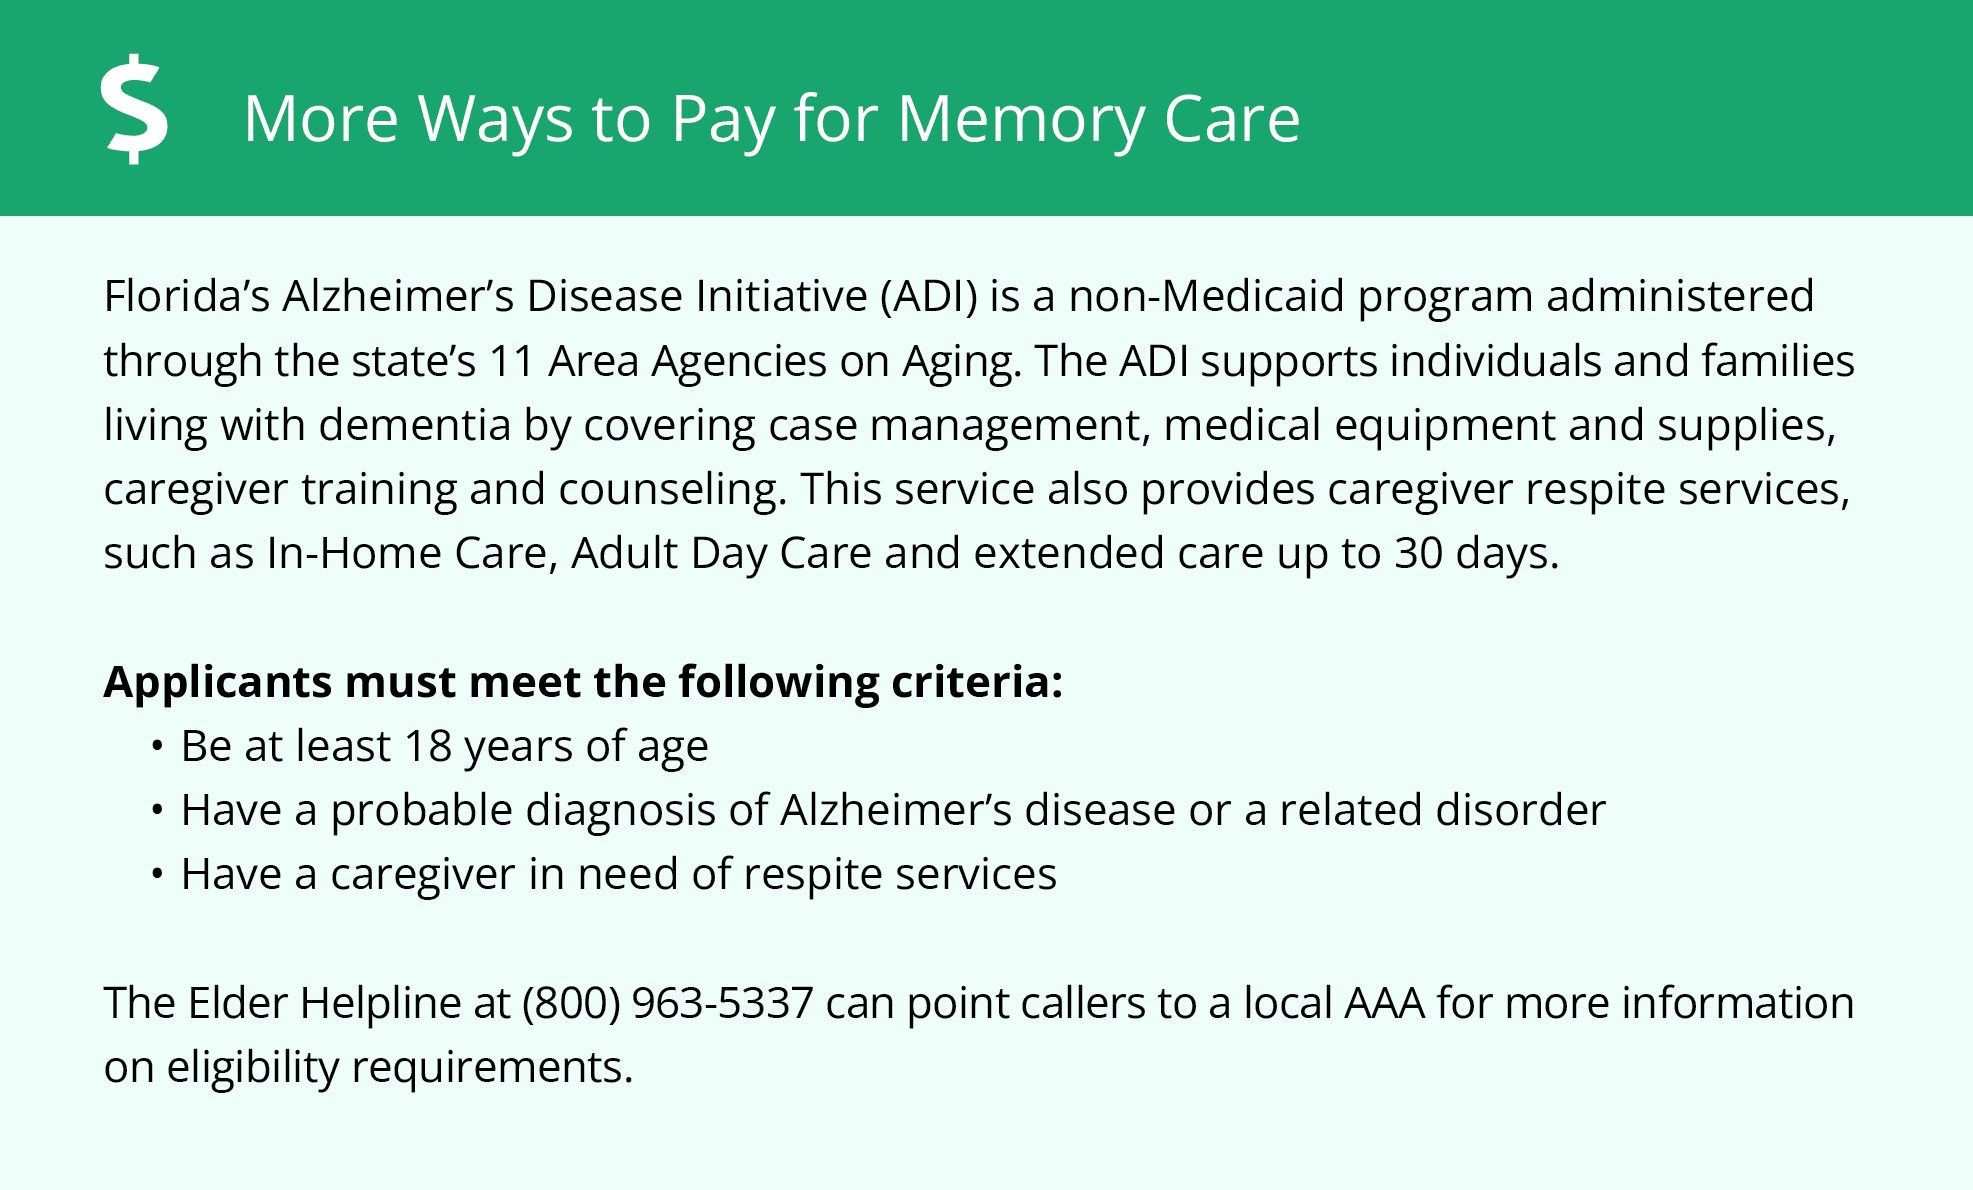 More ways to pay for memory care in FL